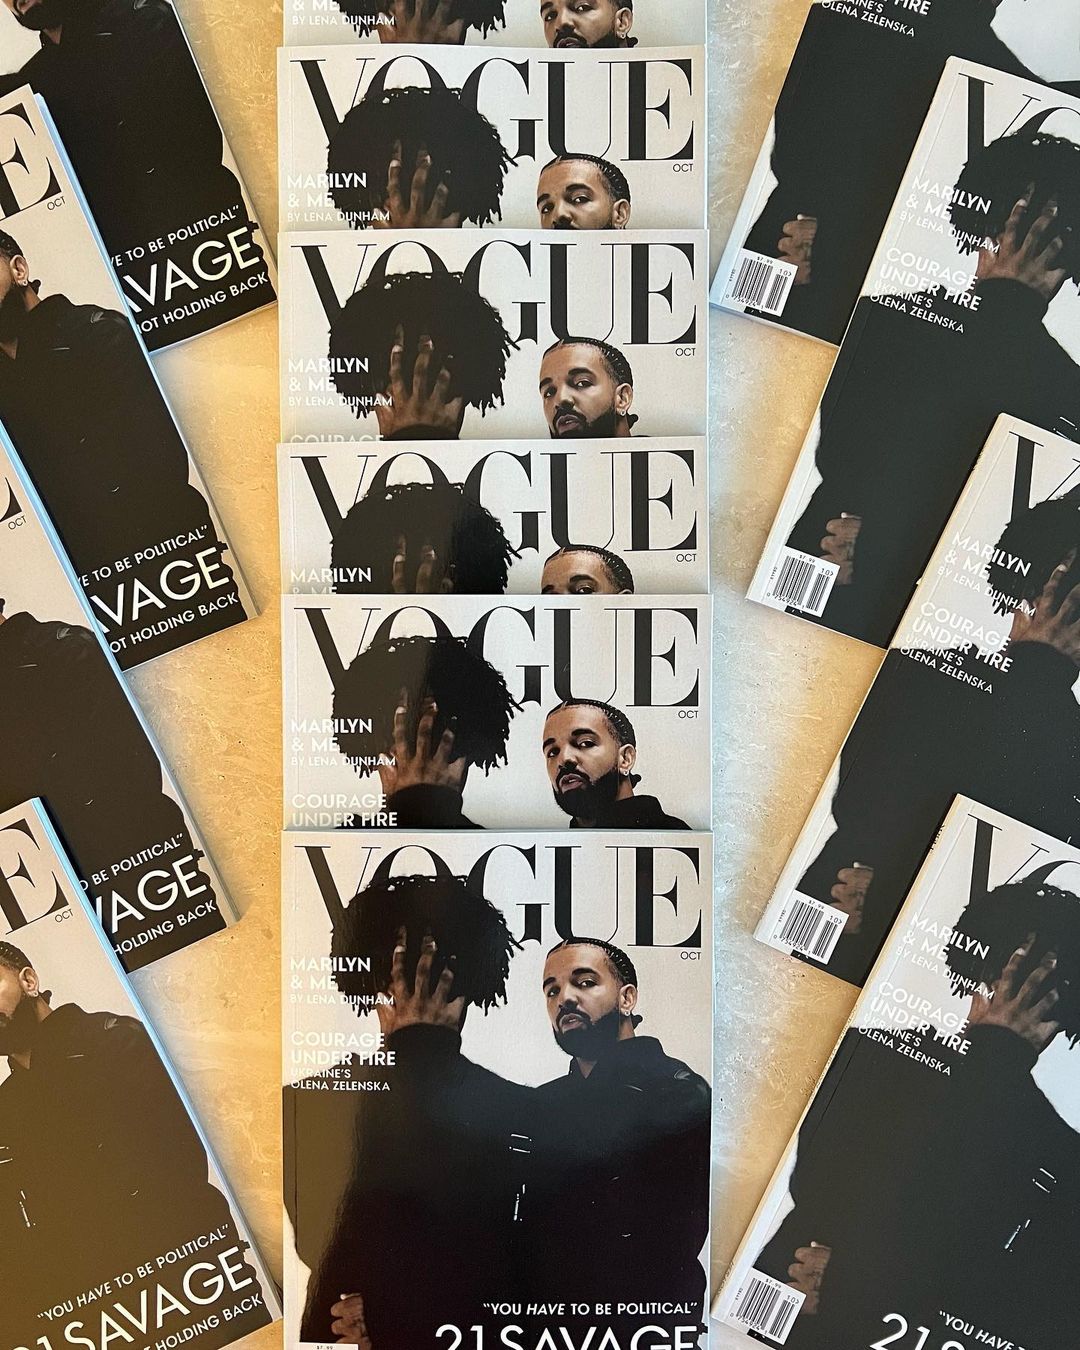 Cond Nast files lawsuit against Drake, 21 Savage for faking Vogue cover